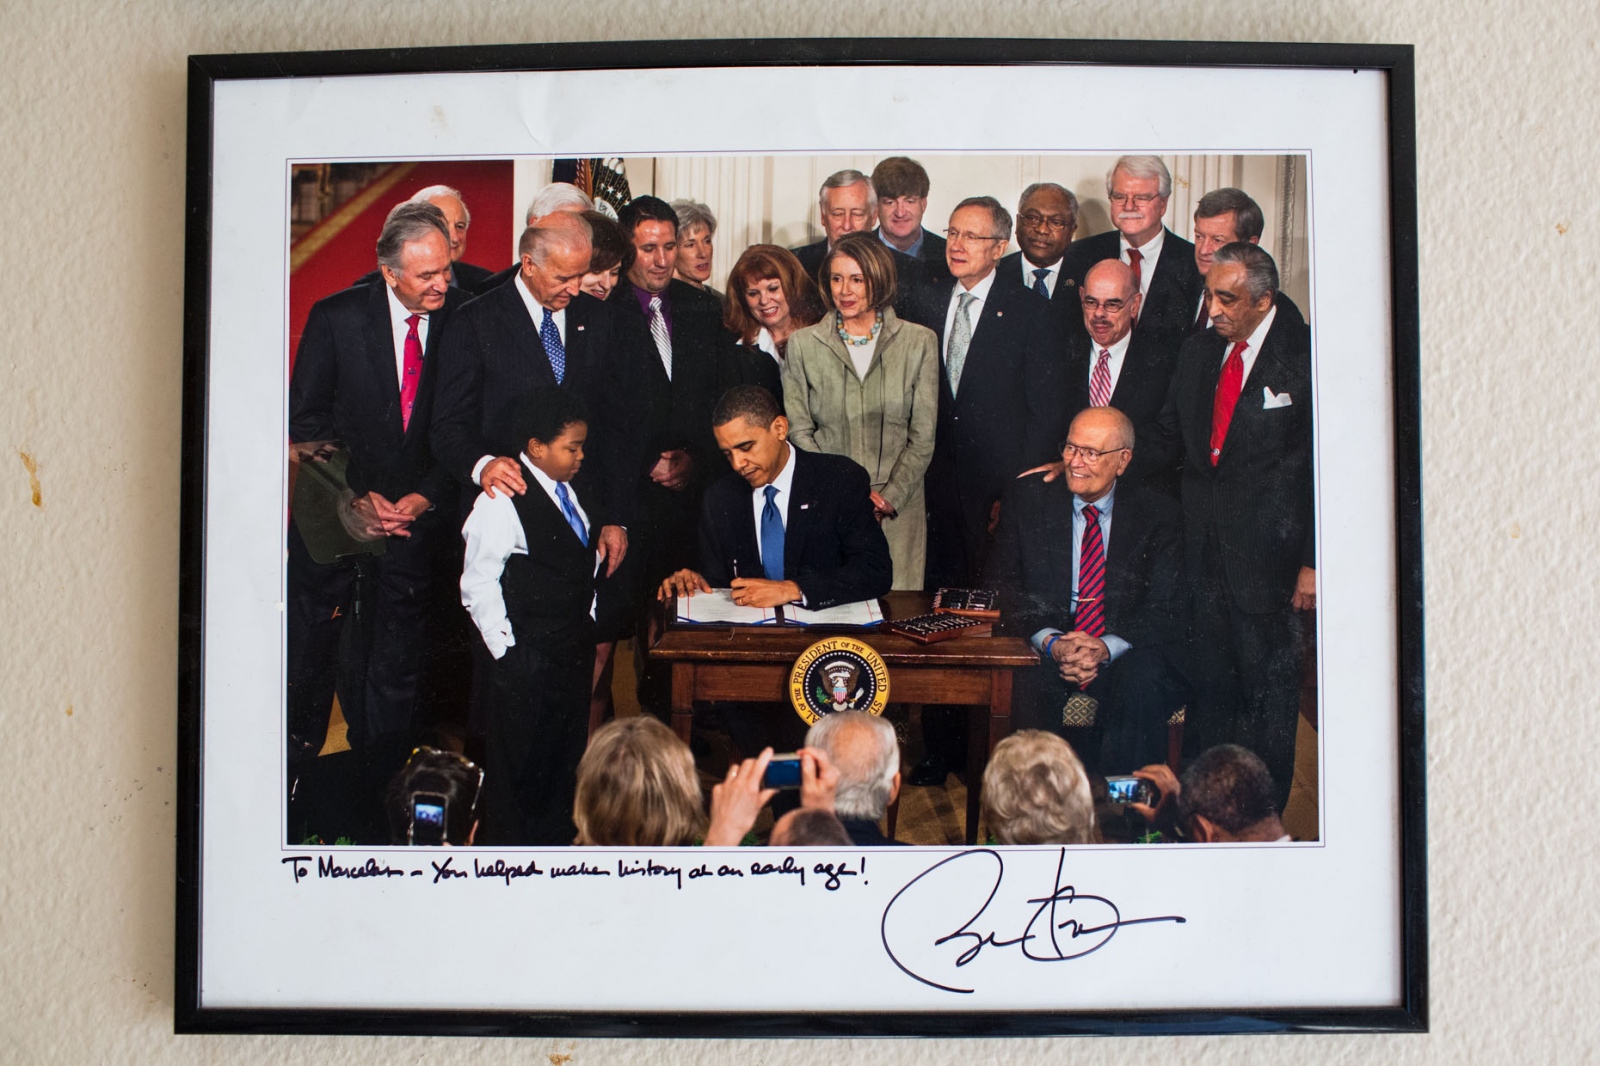  Marcelas Owens keeps a reminder of the "old Marcelas" in her familys living room. President Obama signed the picture, "To Marcelas....